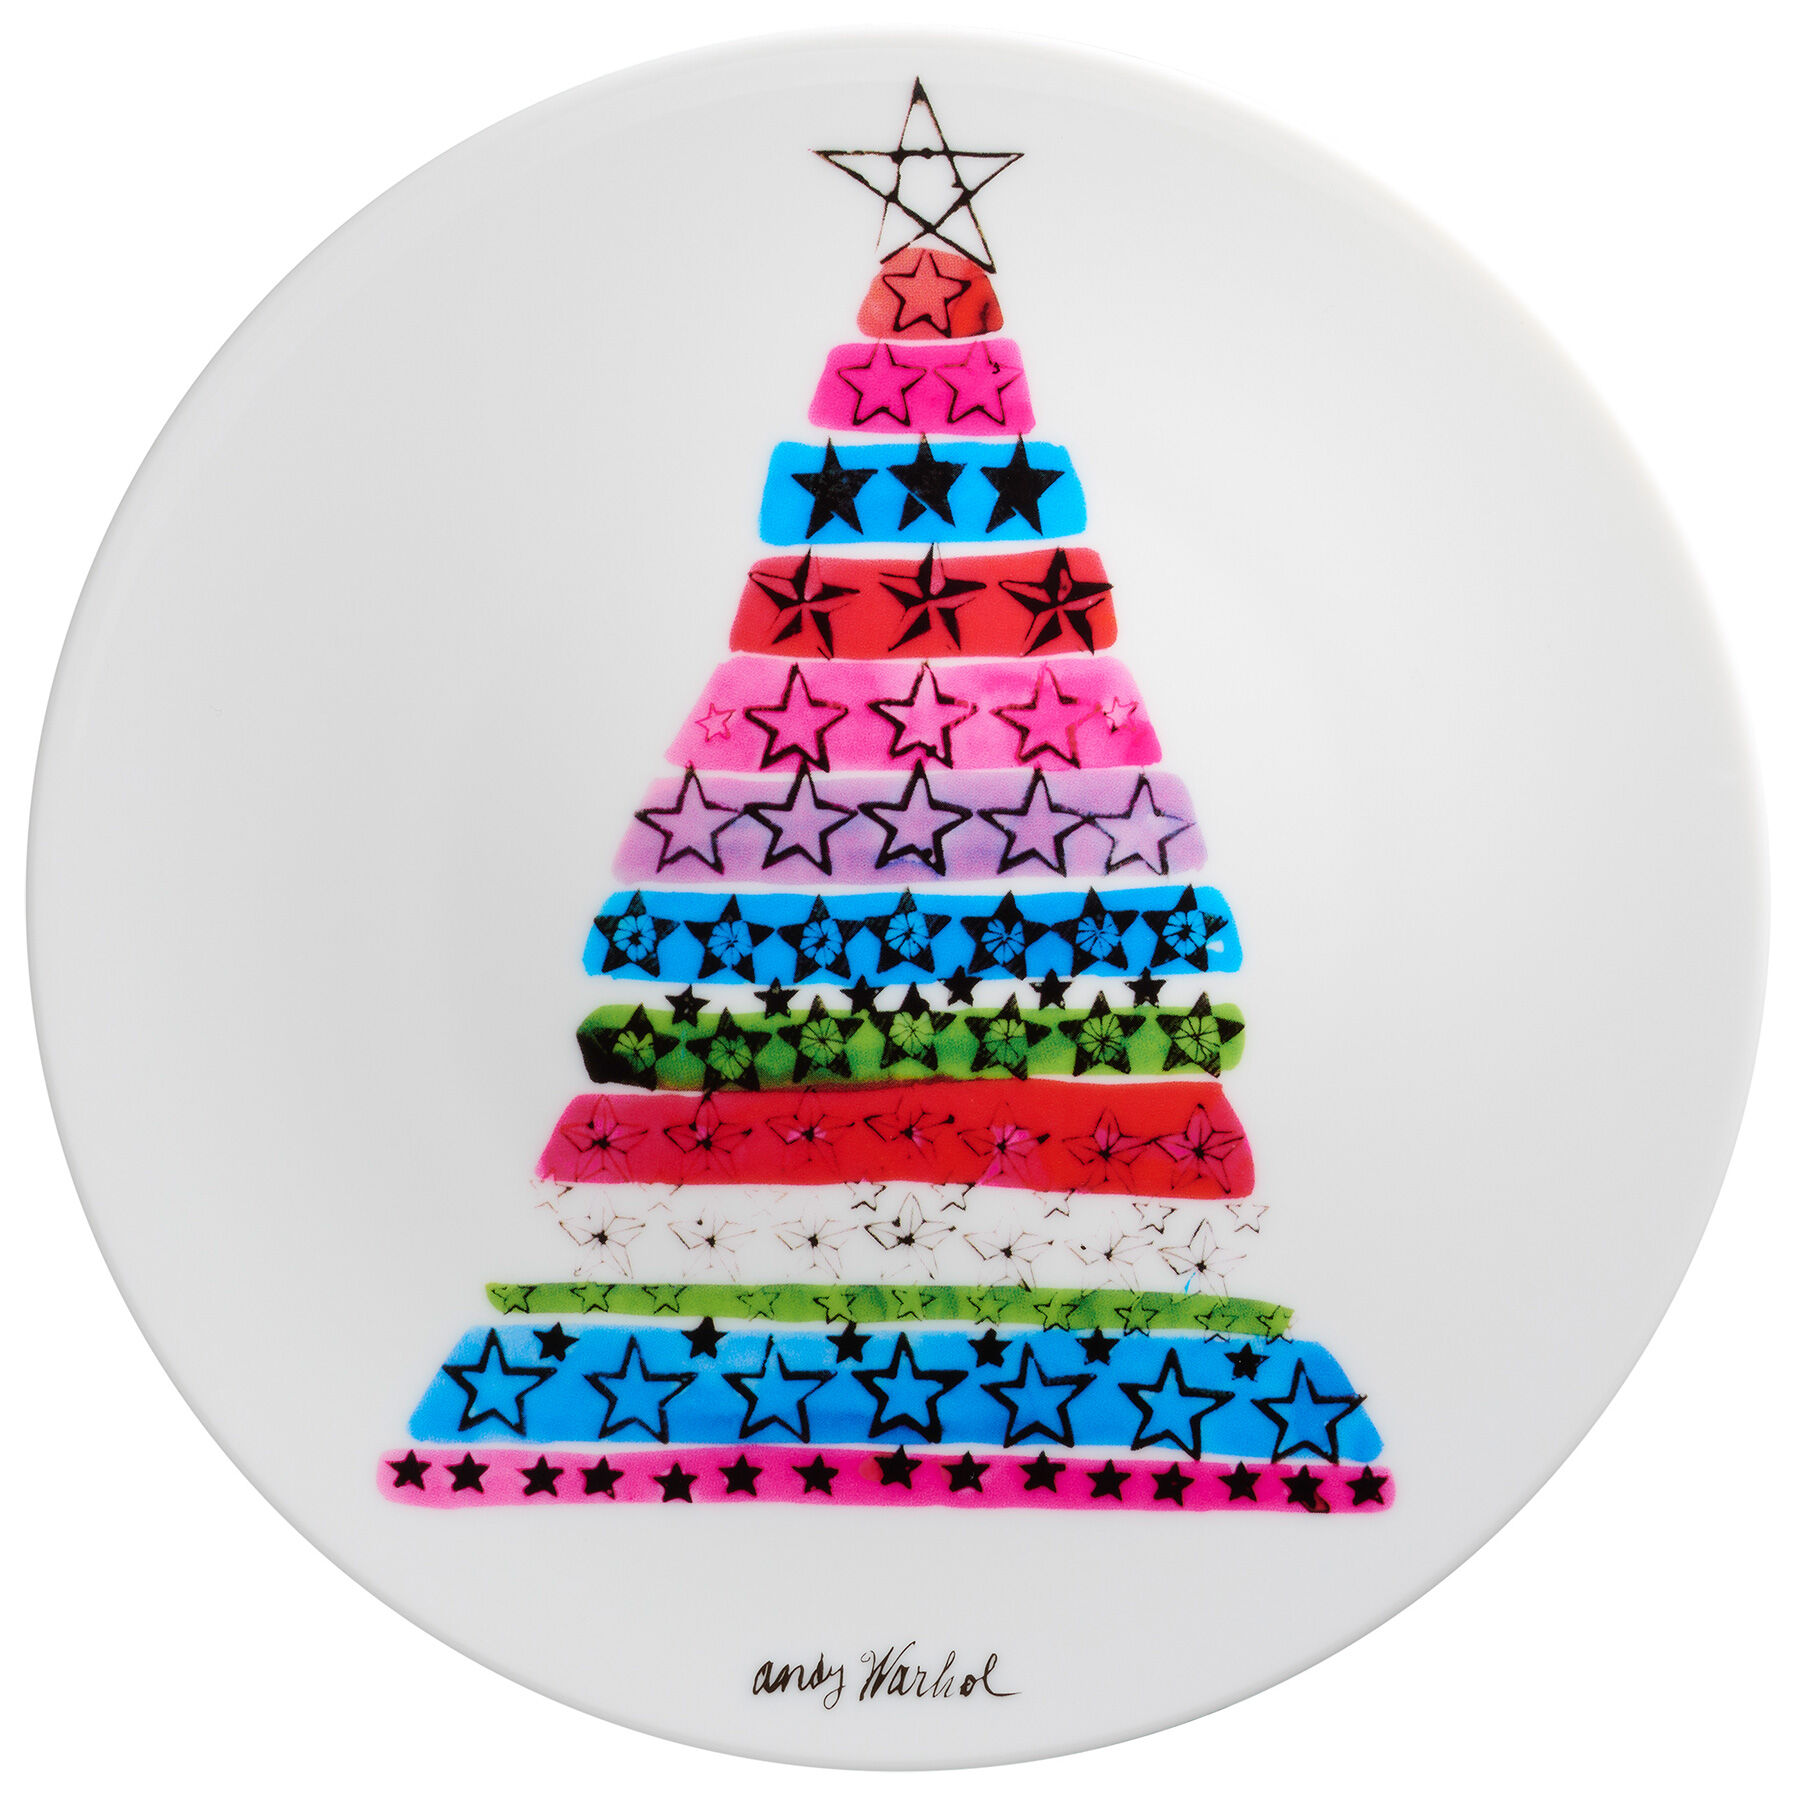 Porcelain plate "Christmas - Tree" by Andy Warhol